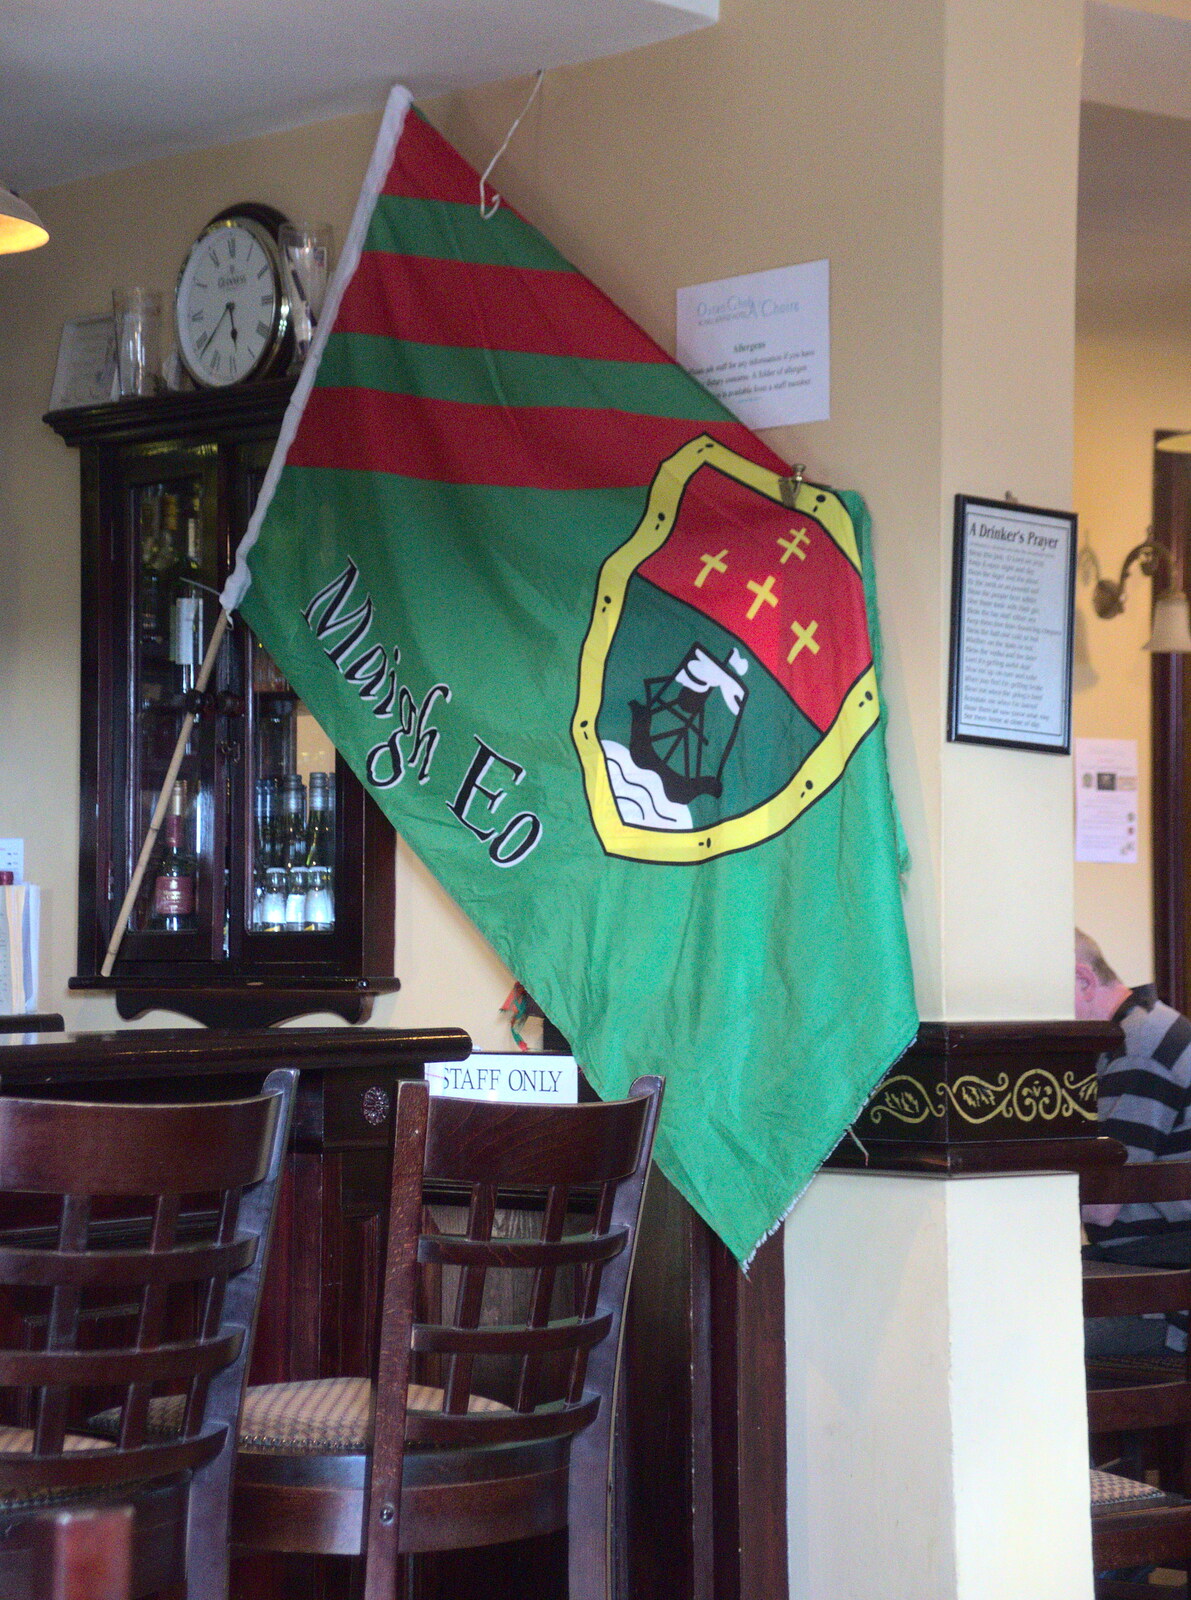 A Maigh Eo GAA flag from A Bike Ride to Mulranny, County Mayo, Ireland - 9th August 2017